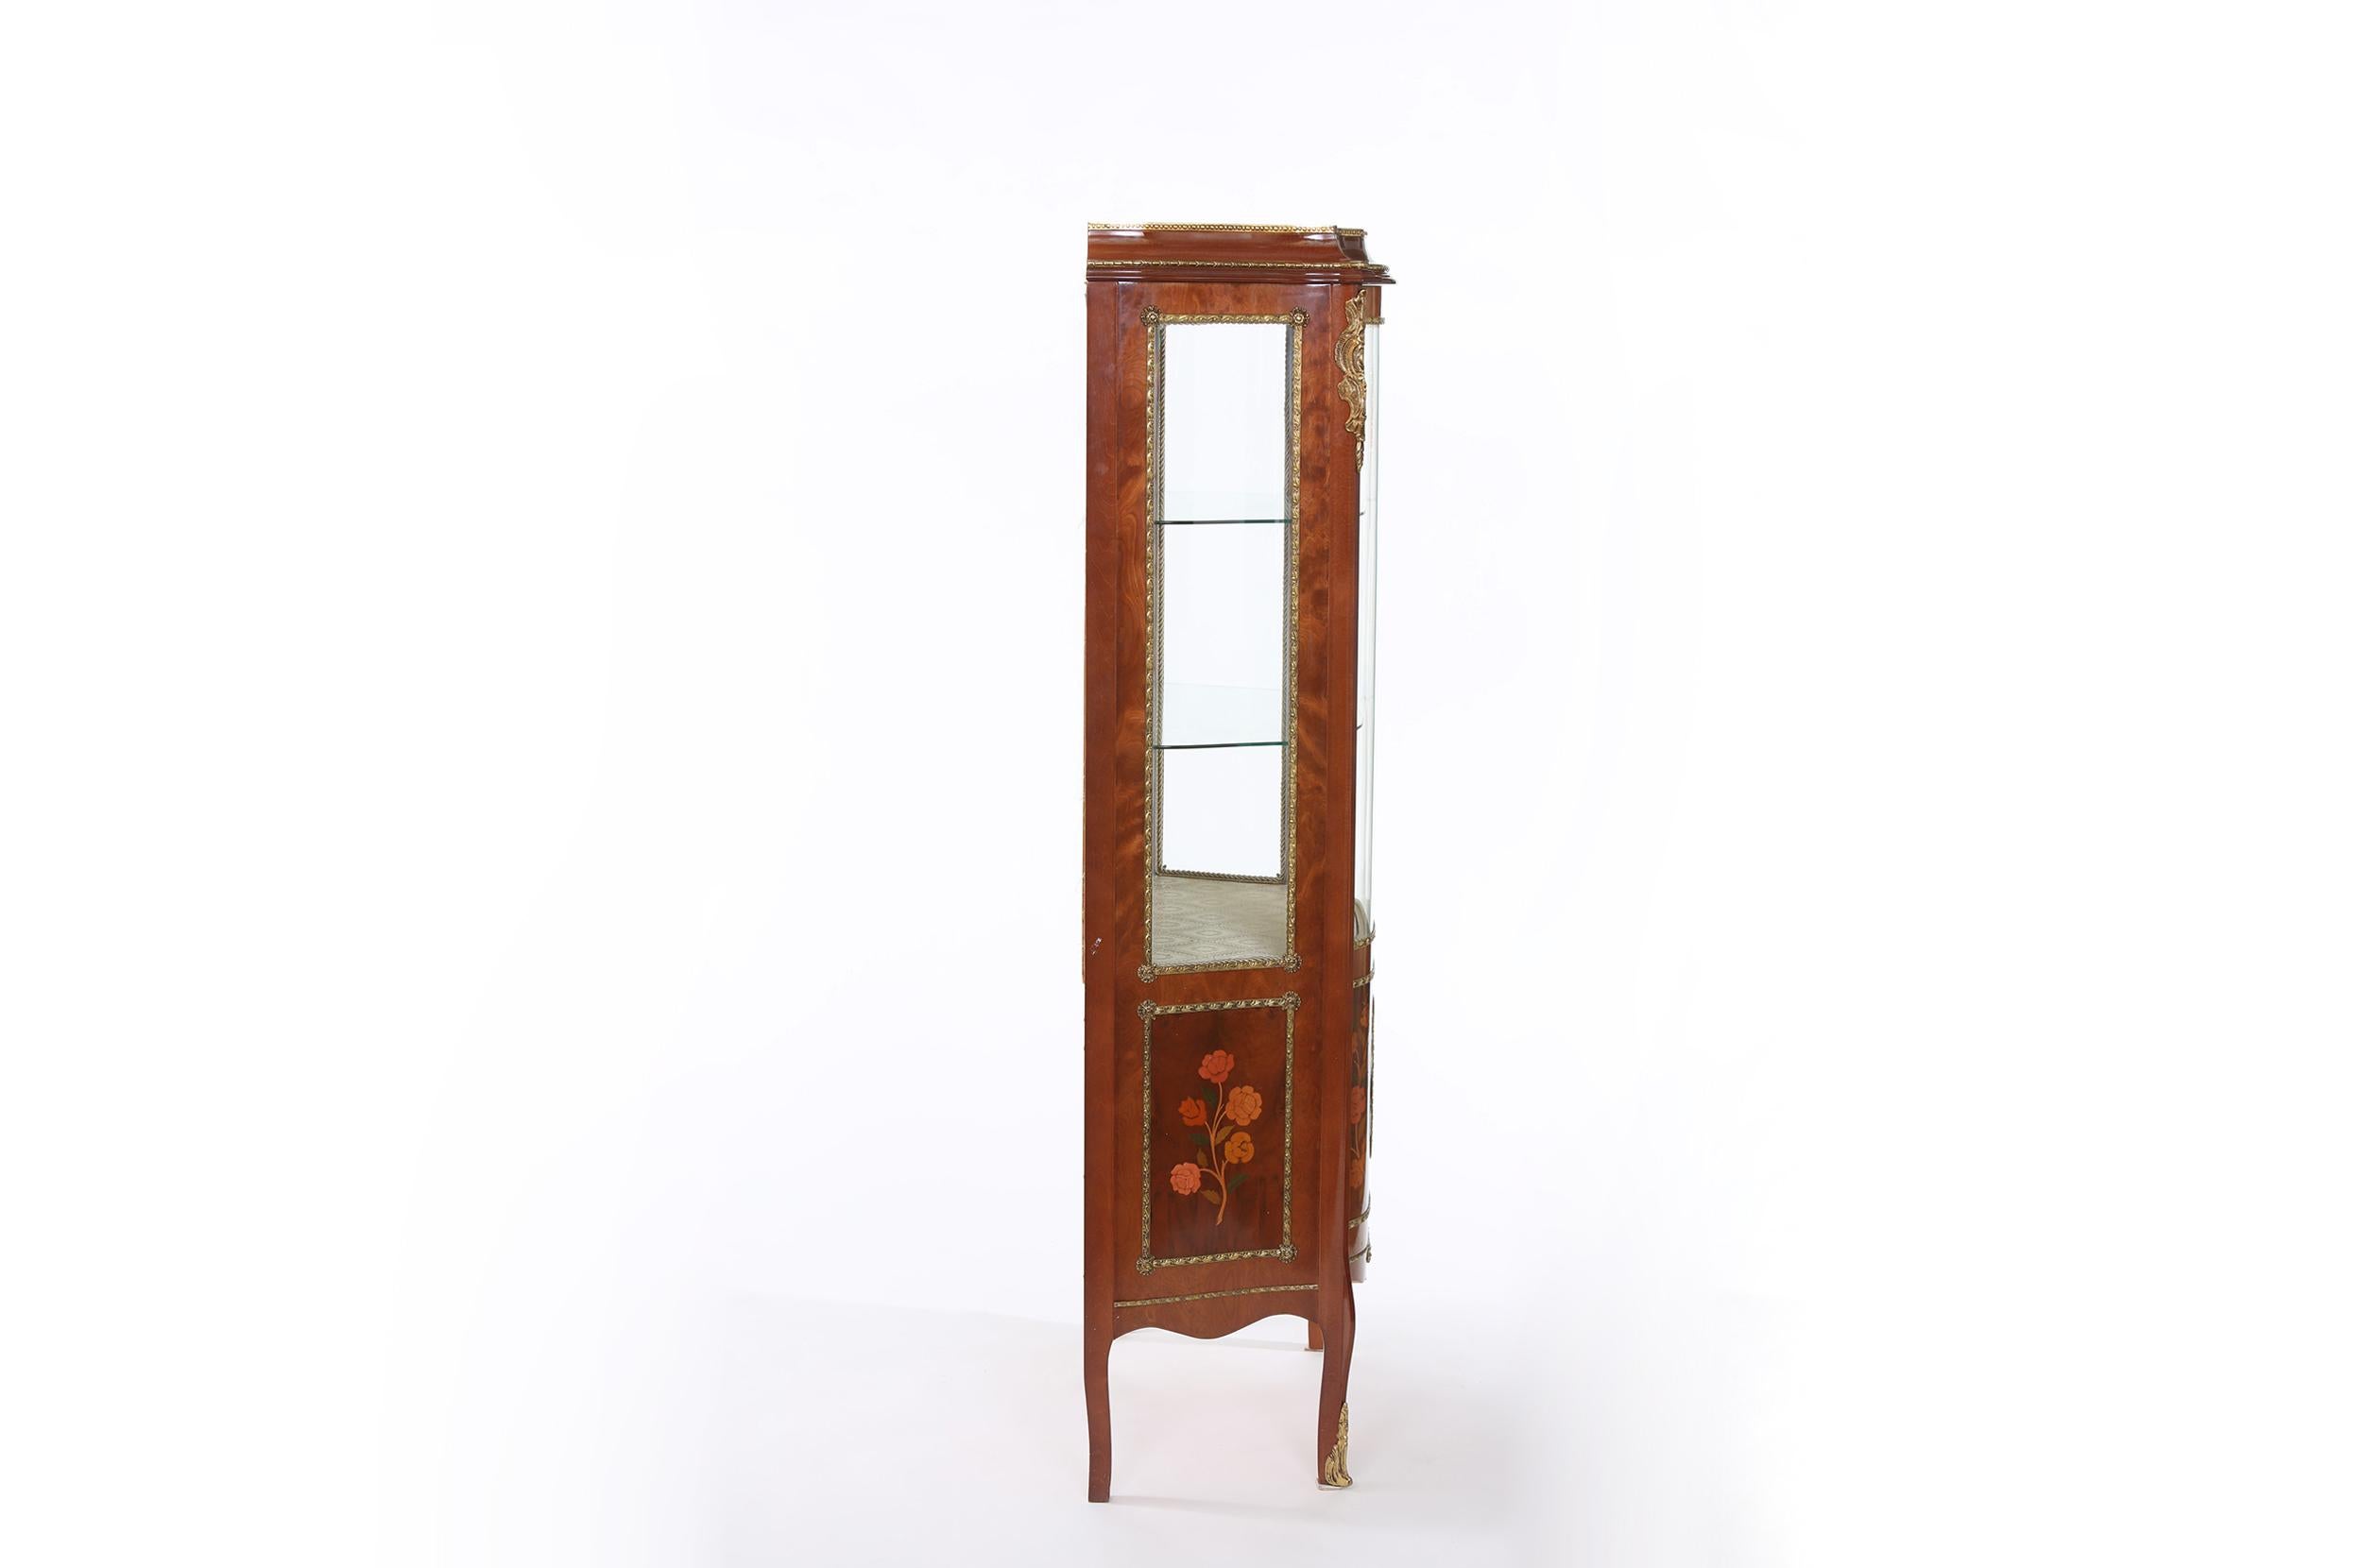 Louis XV style bronze mounted China display cabinet / vitrine with exterior inlaid design details. The interior of the cabinet has two glass shelves and lined with gold patterned brocade. The cabinet stands on cabriole legs with ormolu mounts. The